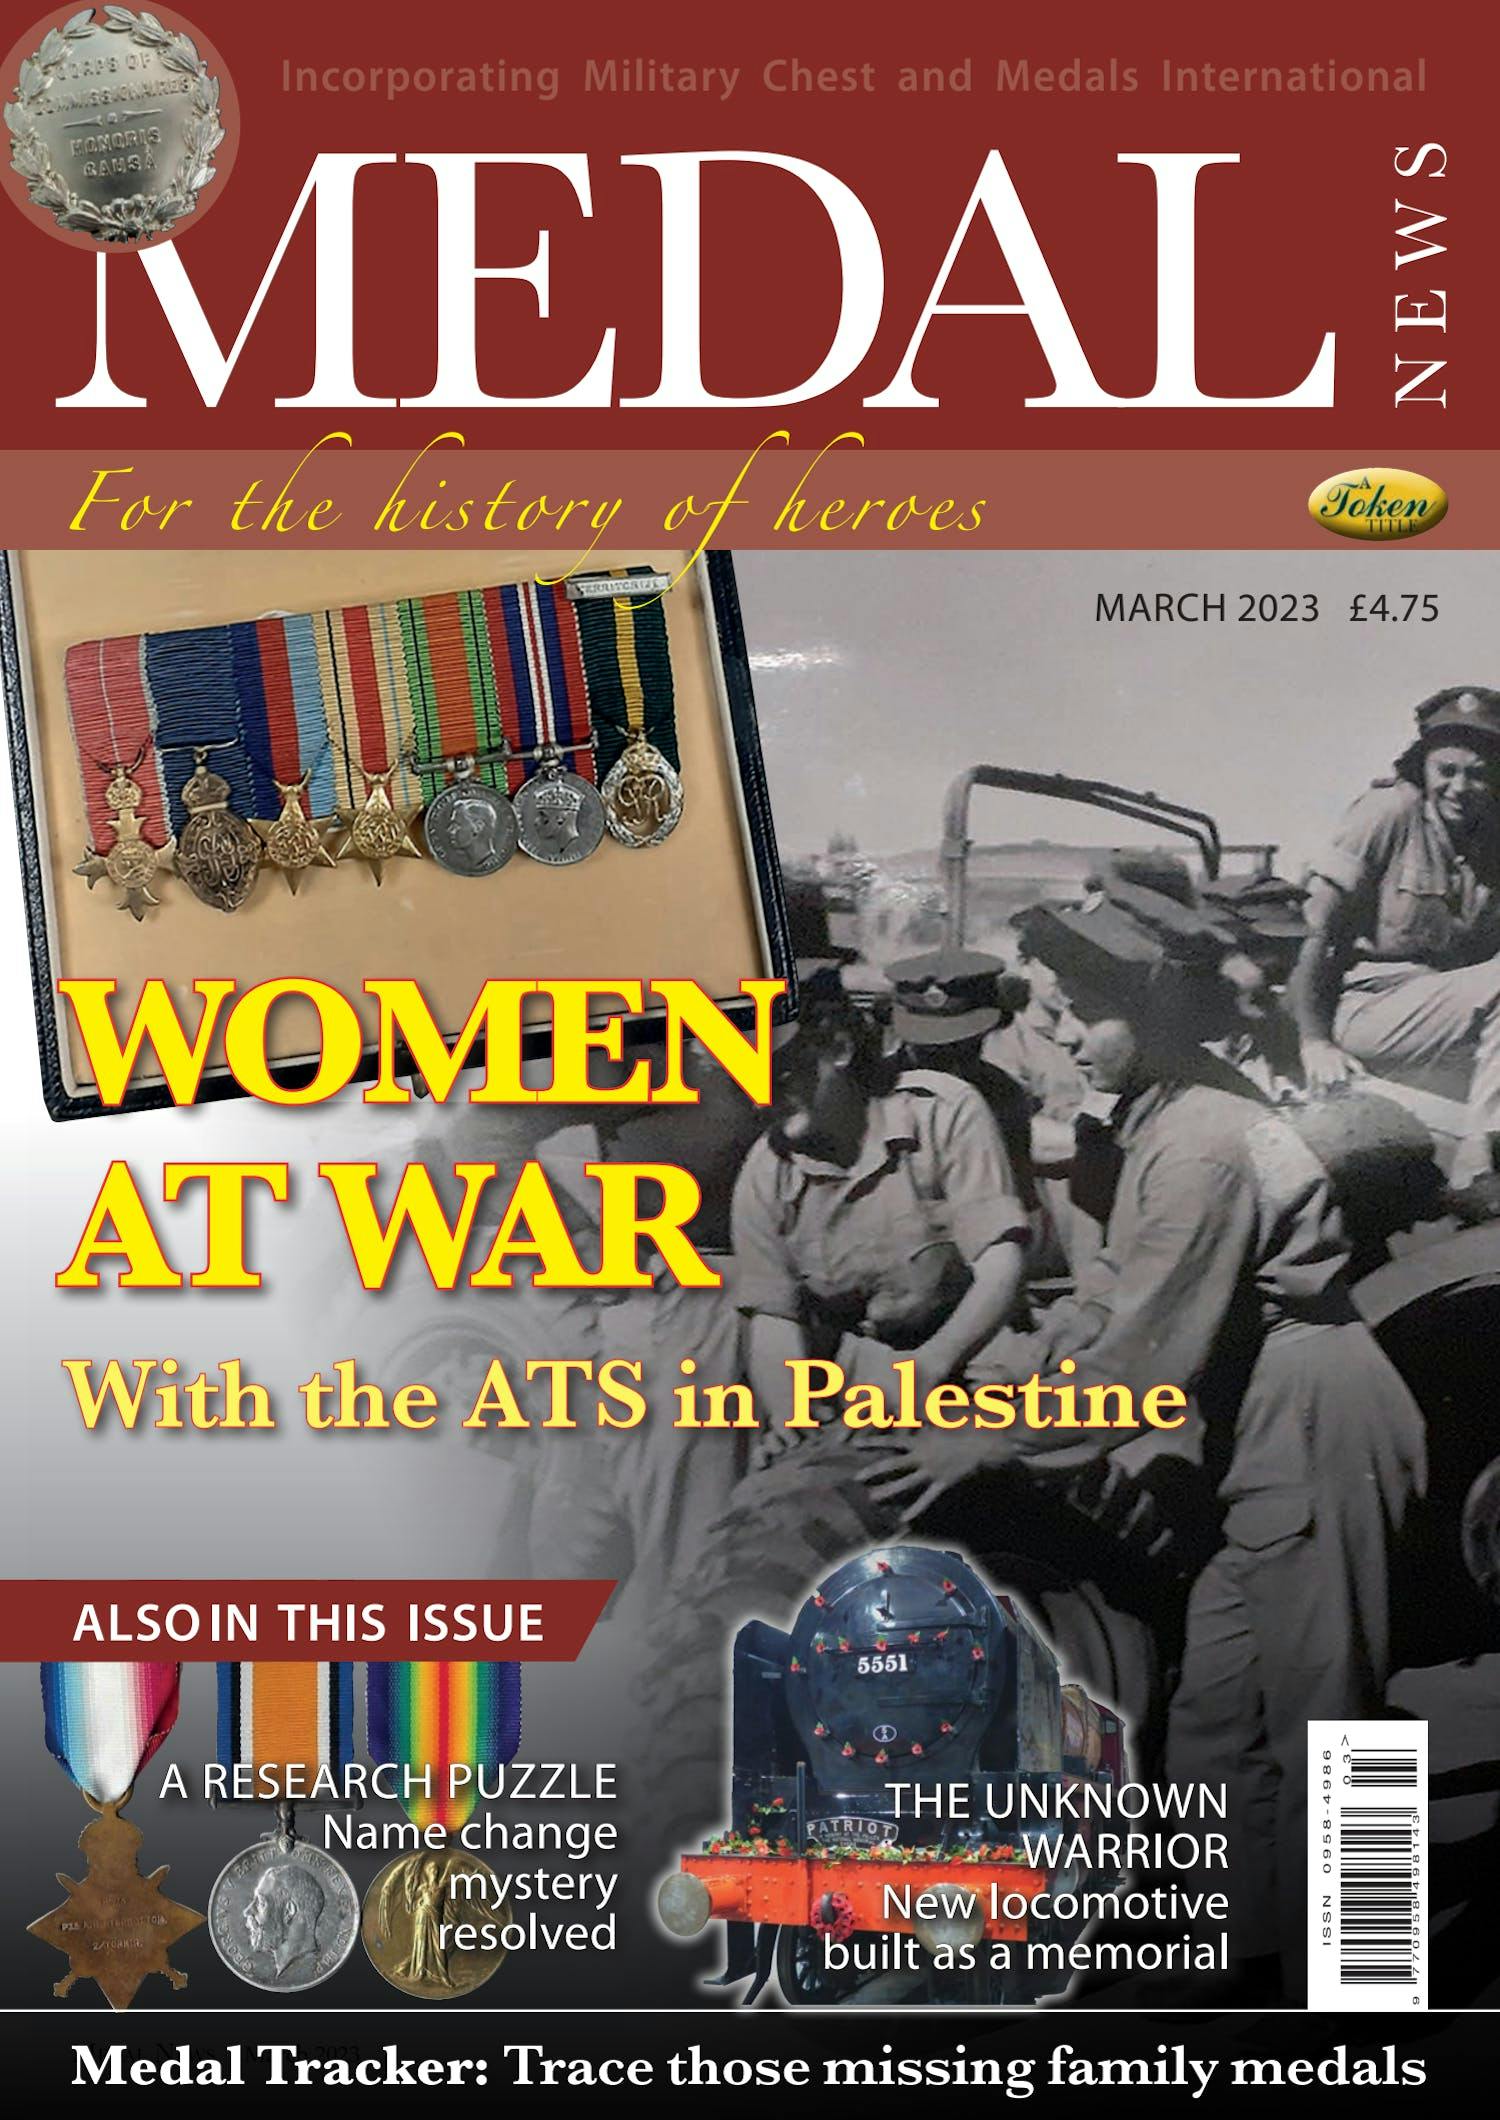 The front cover of Medal News, March 2023 - Volume 61, Number 3